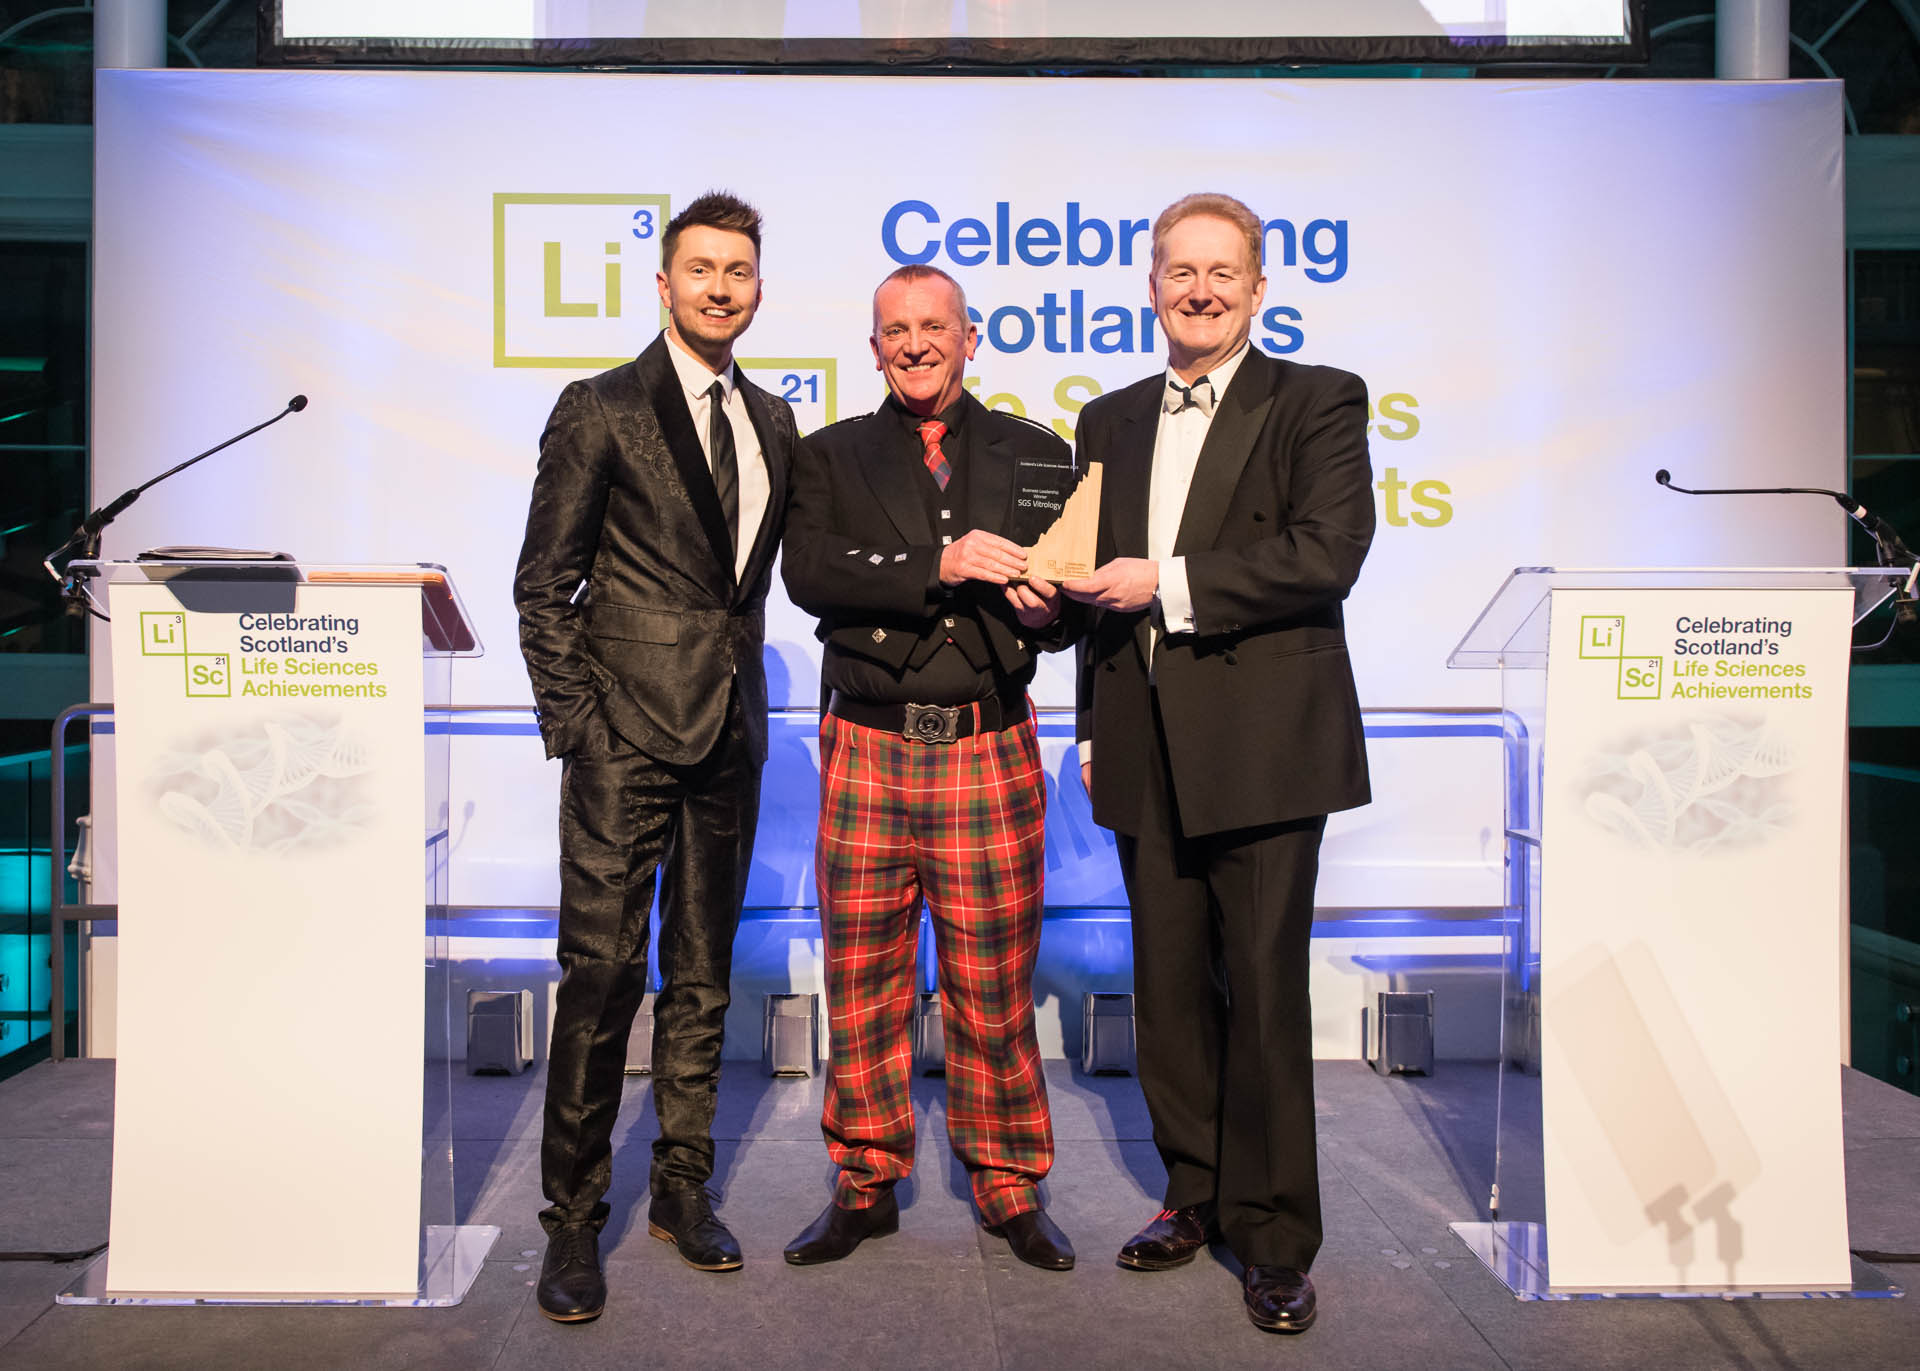 Image Dr Archie Lovatt accepting the Scotland's Life Sciences Business Leadership Award 2023 from host Sean Batty and Mark Cook.